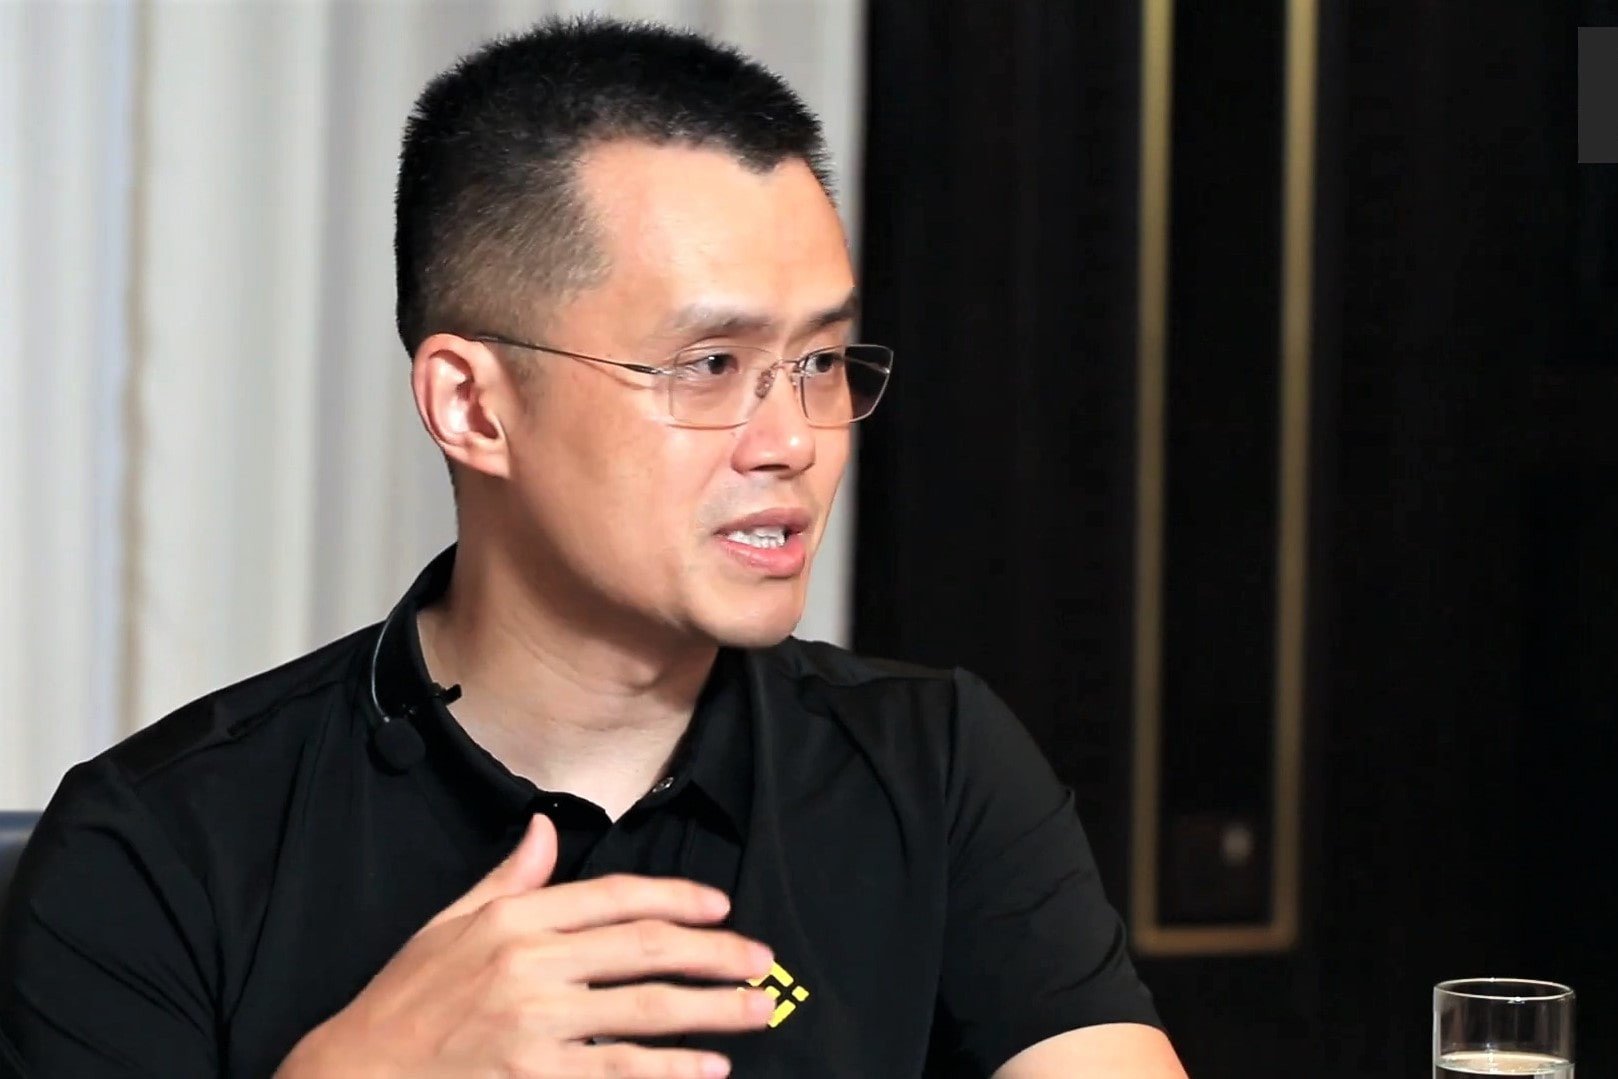 These Are the Types Crypto Projects that Could be Bailed Out According to Binance CEO